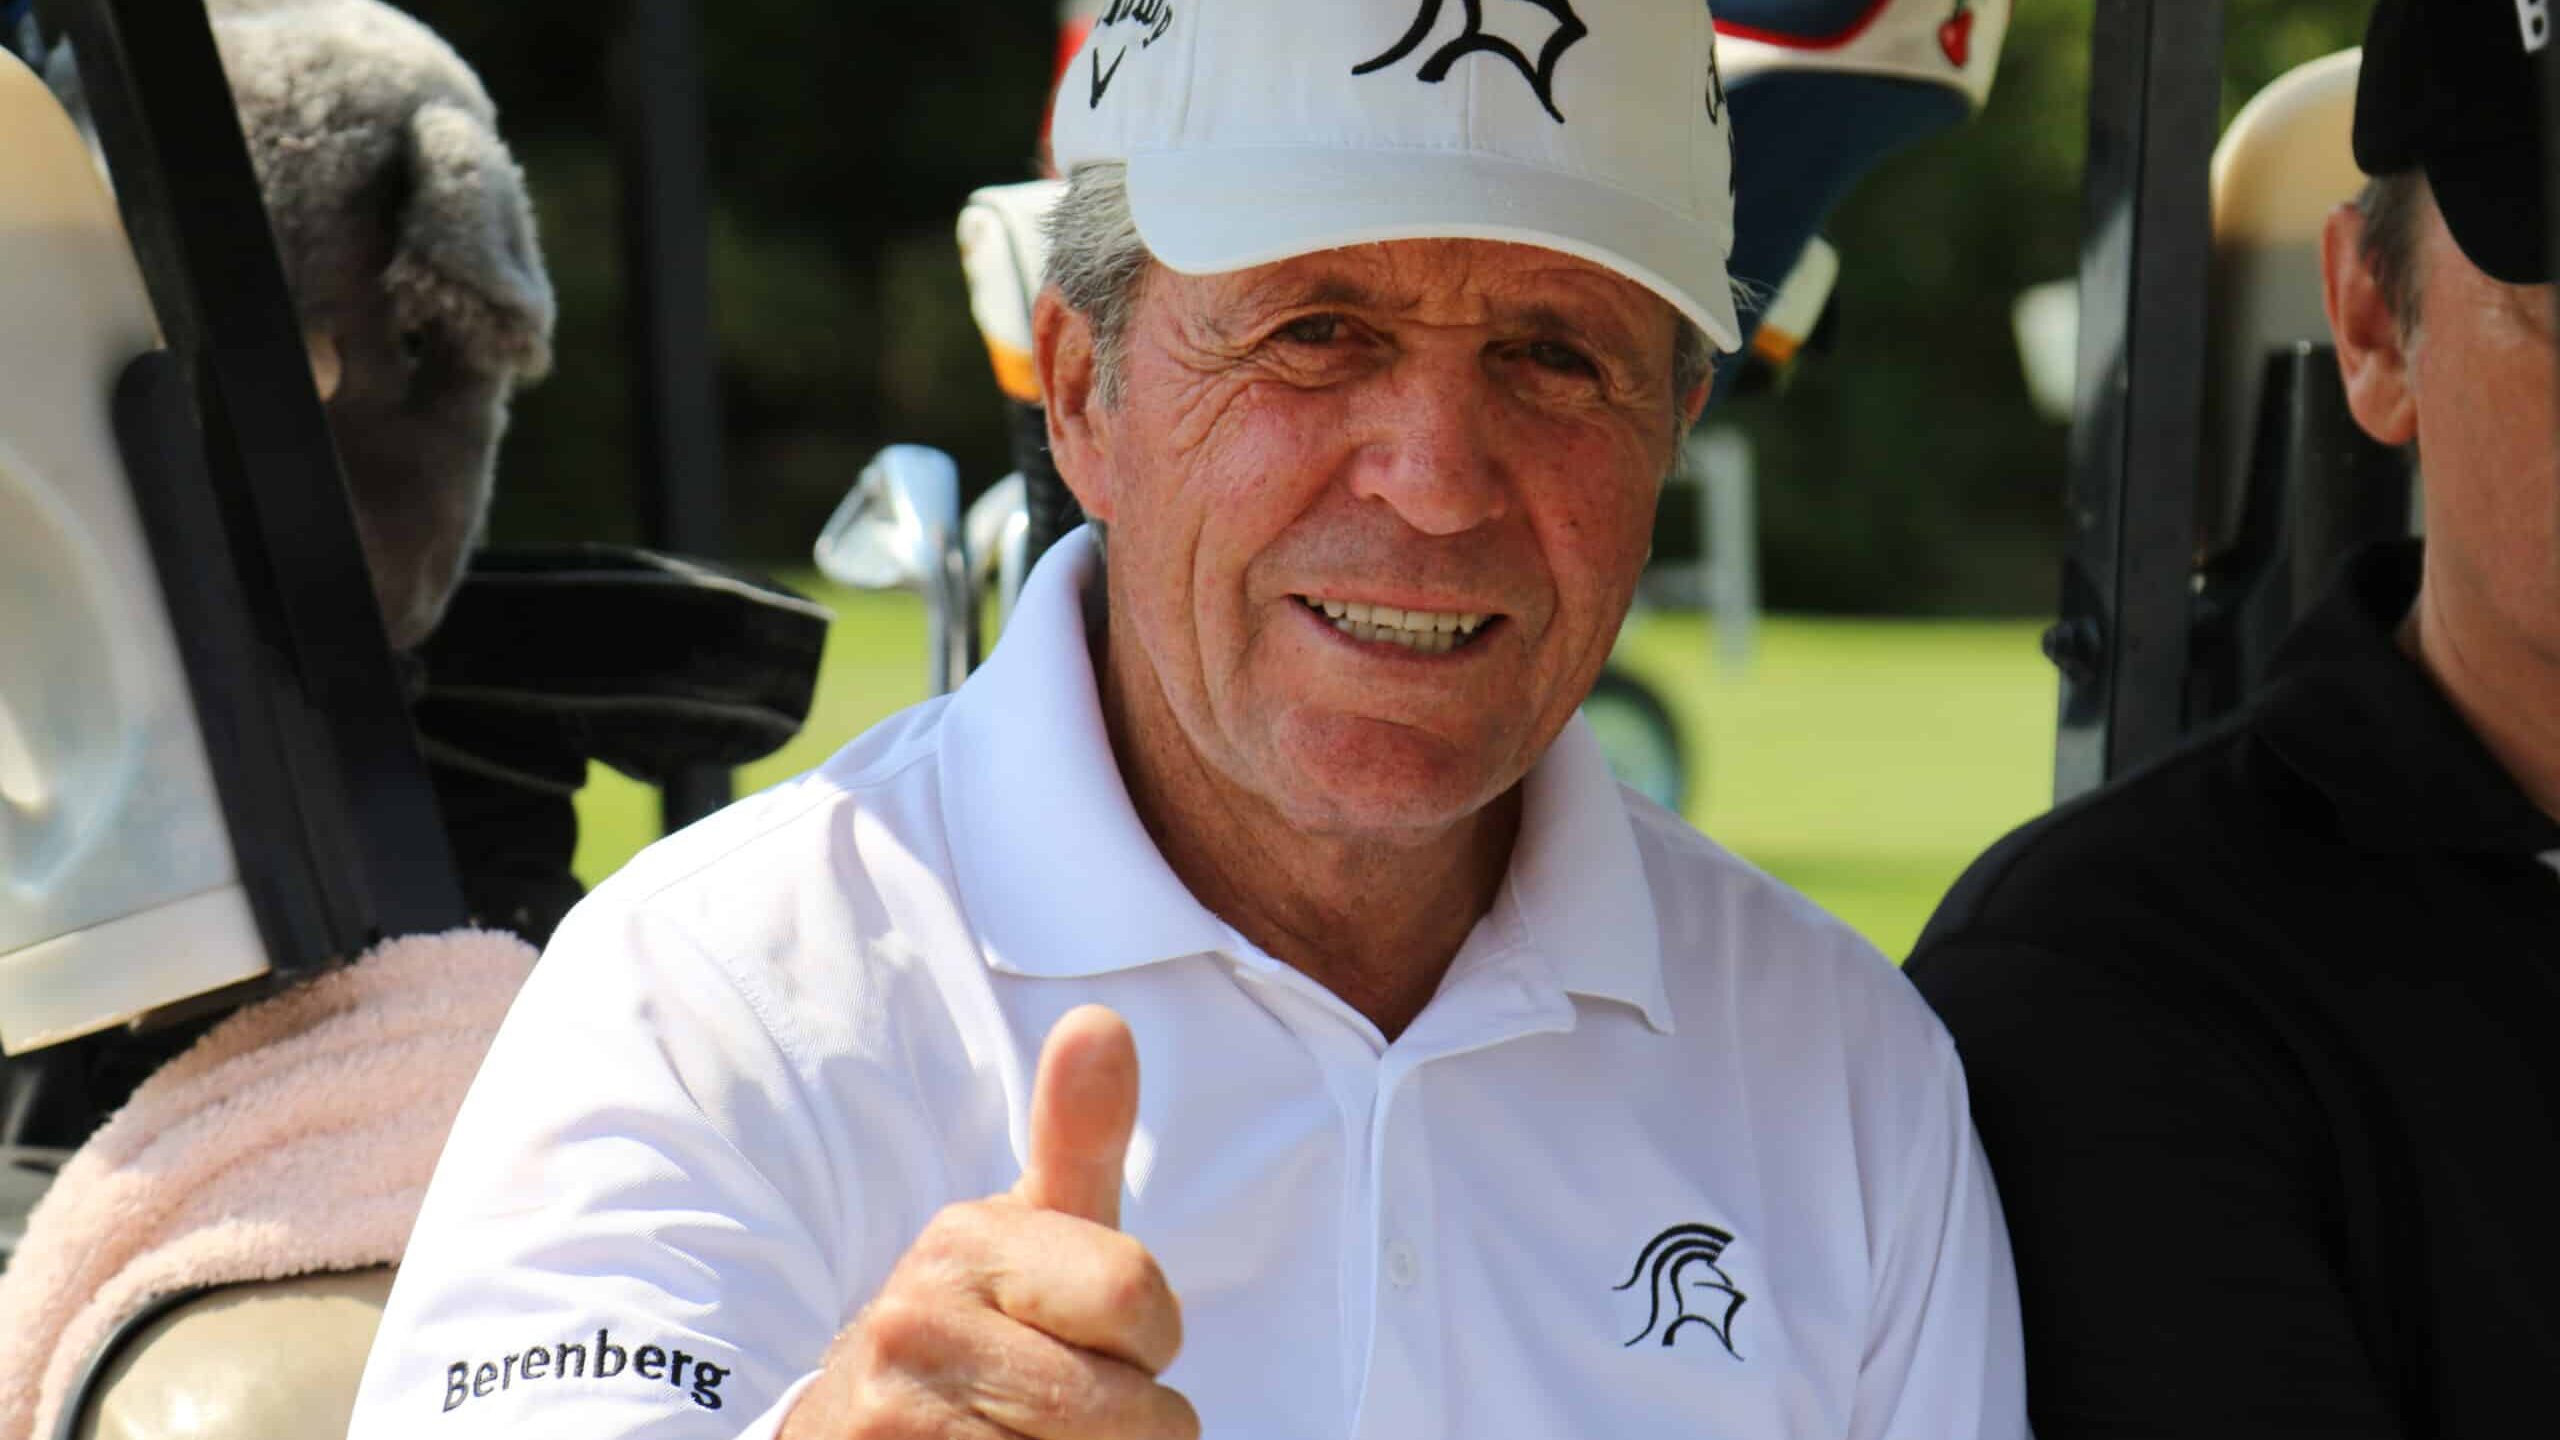 gary player fitness routine keeps him active. Show here in his 80's and in shape wearing all white, and has a smile with a thumbs up.